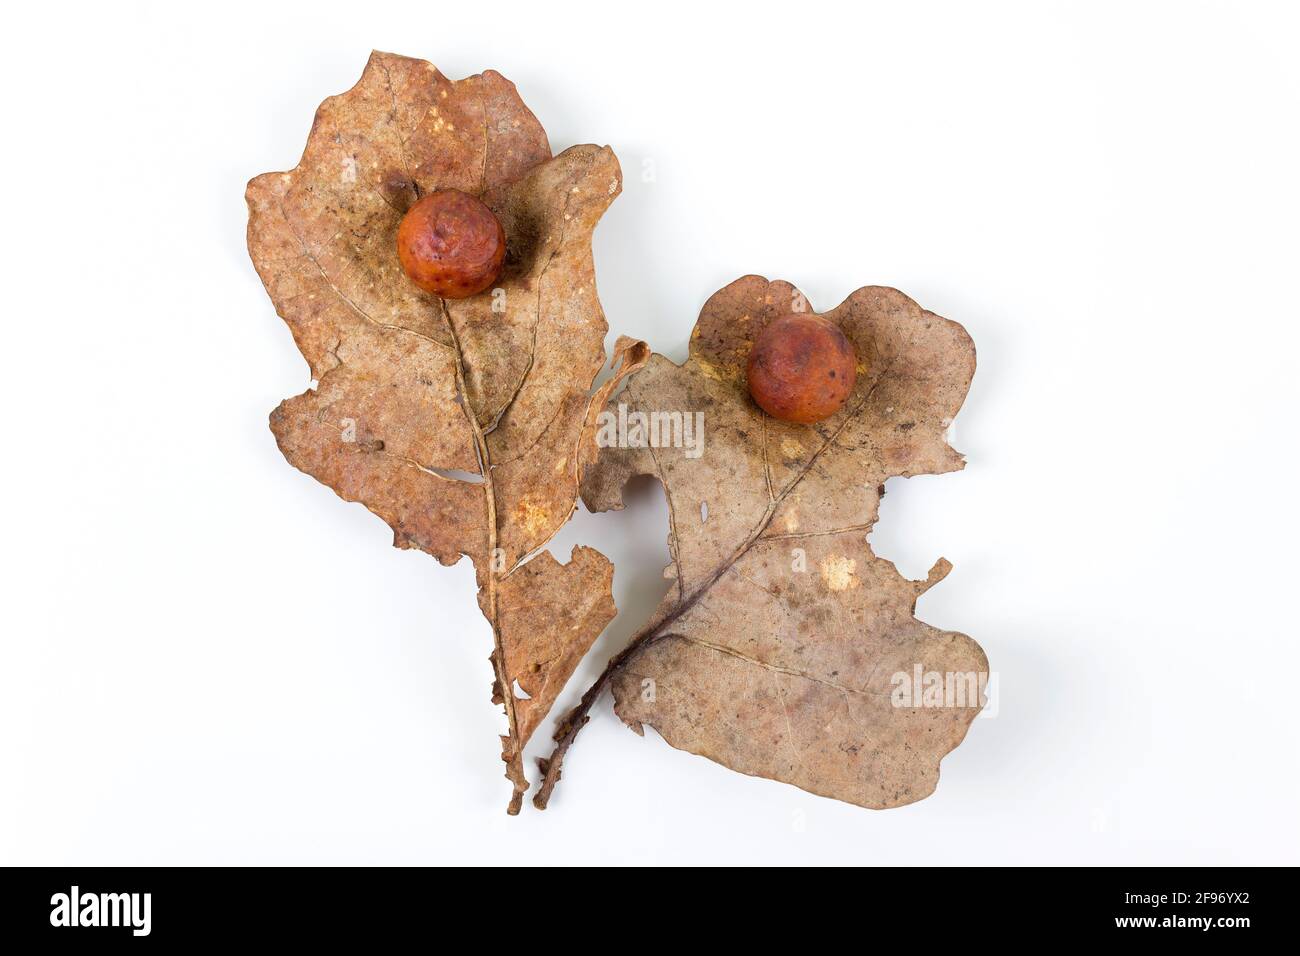 Oak apple or oak gall on two fallen dry leaves found in a forest in springtime isolated on white background. Tree infection. Flat lay. Stock Photo